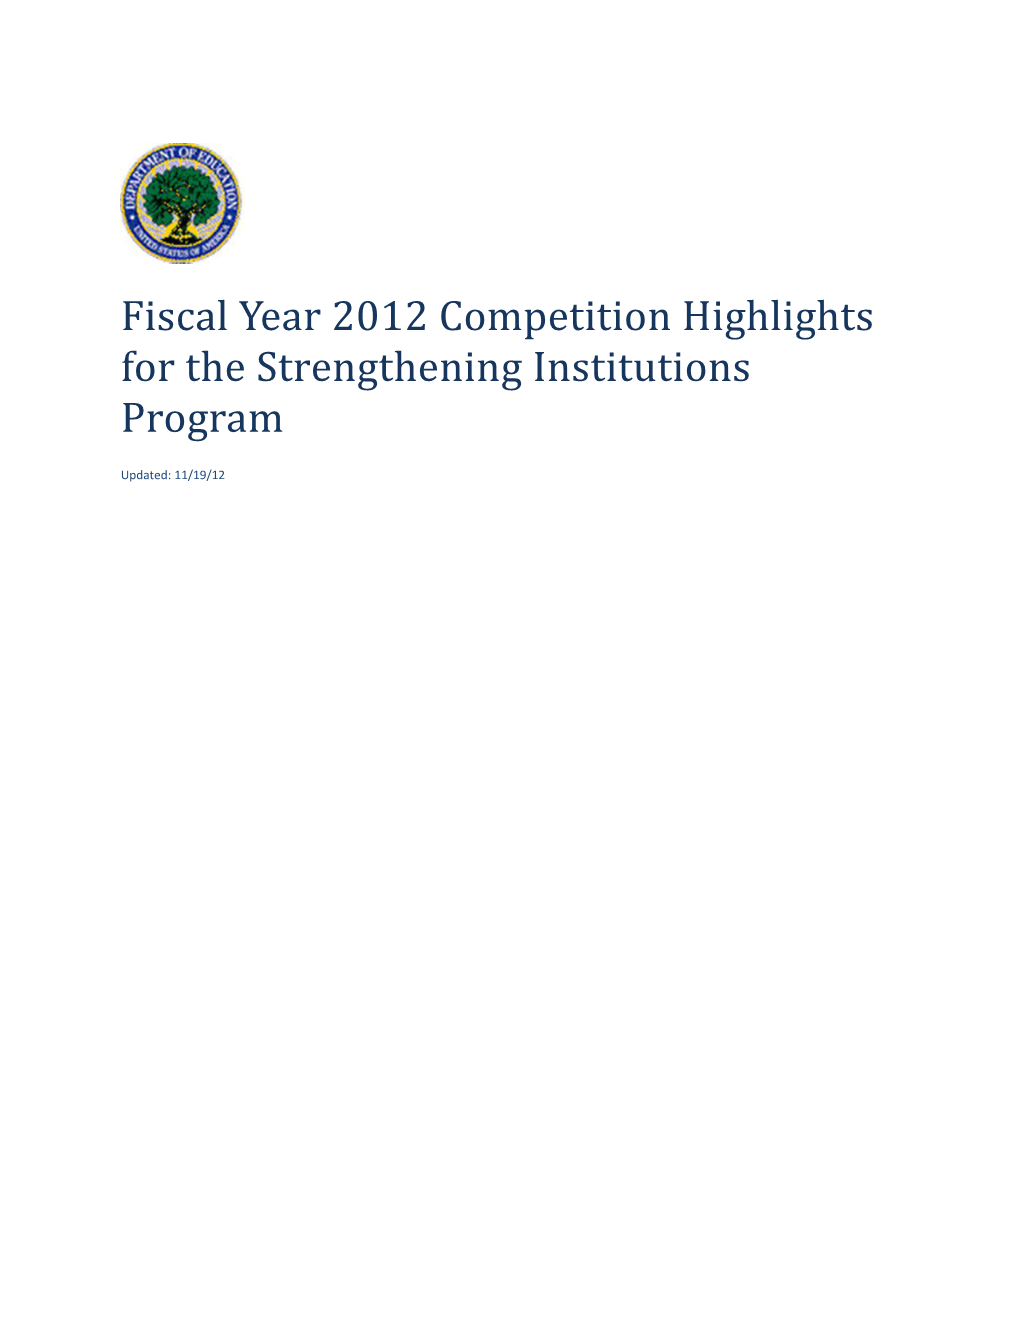 FY 2012 Competition Highlights for the Strengthening Institutions Program (MS Word)